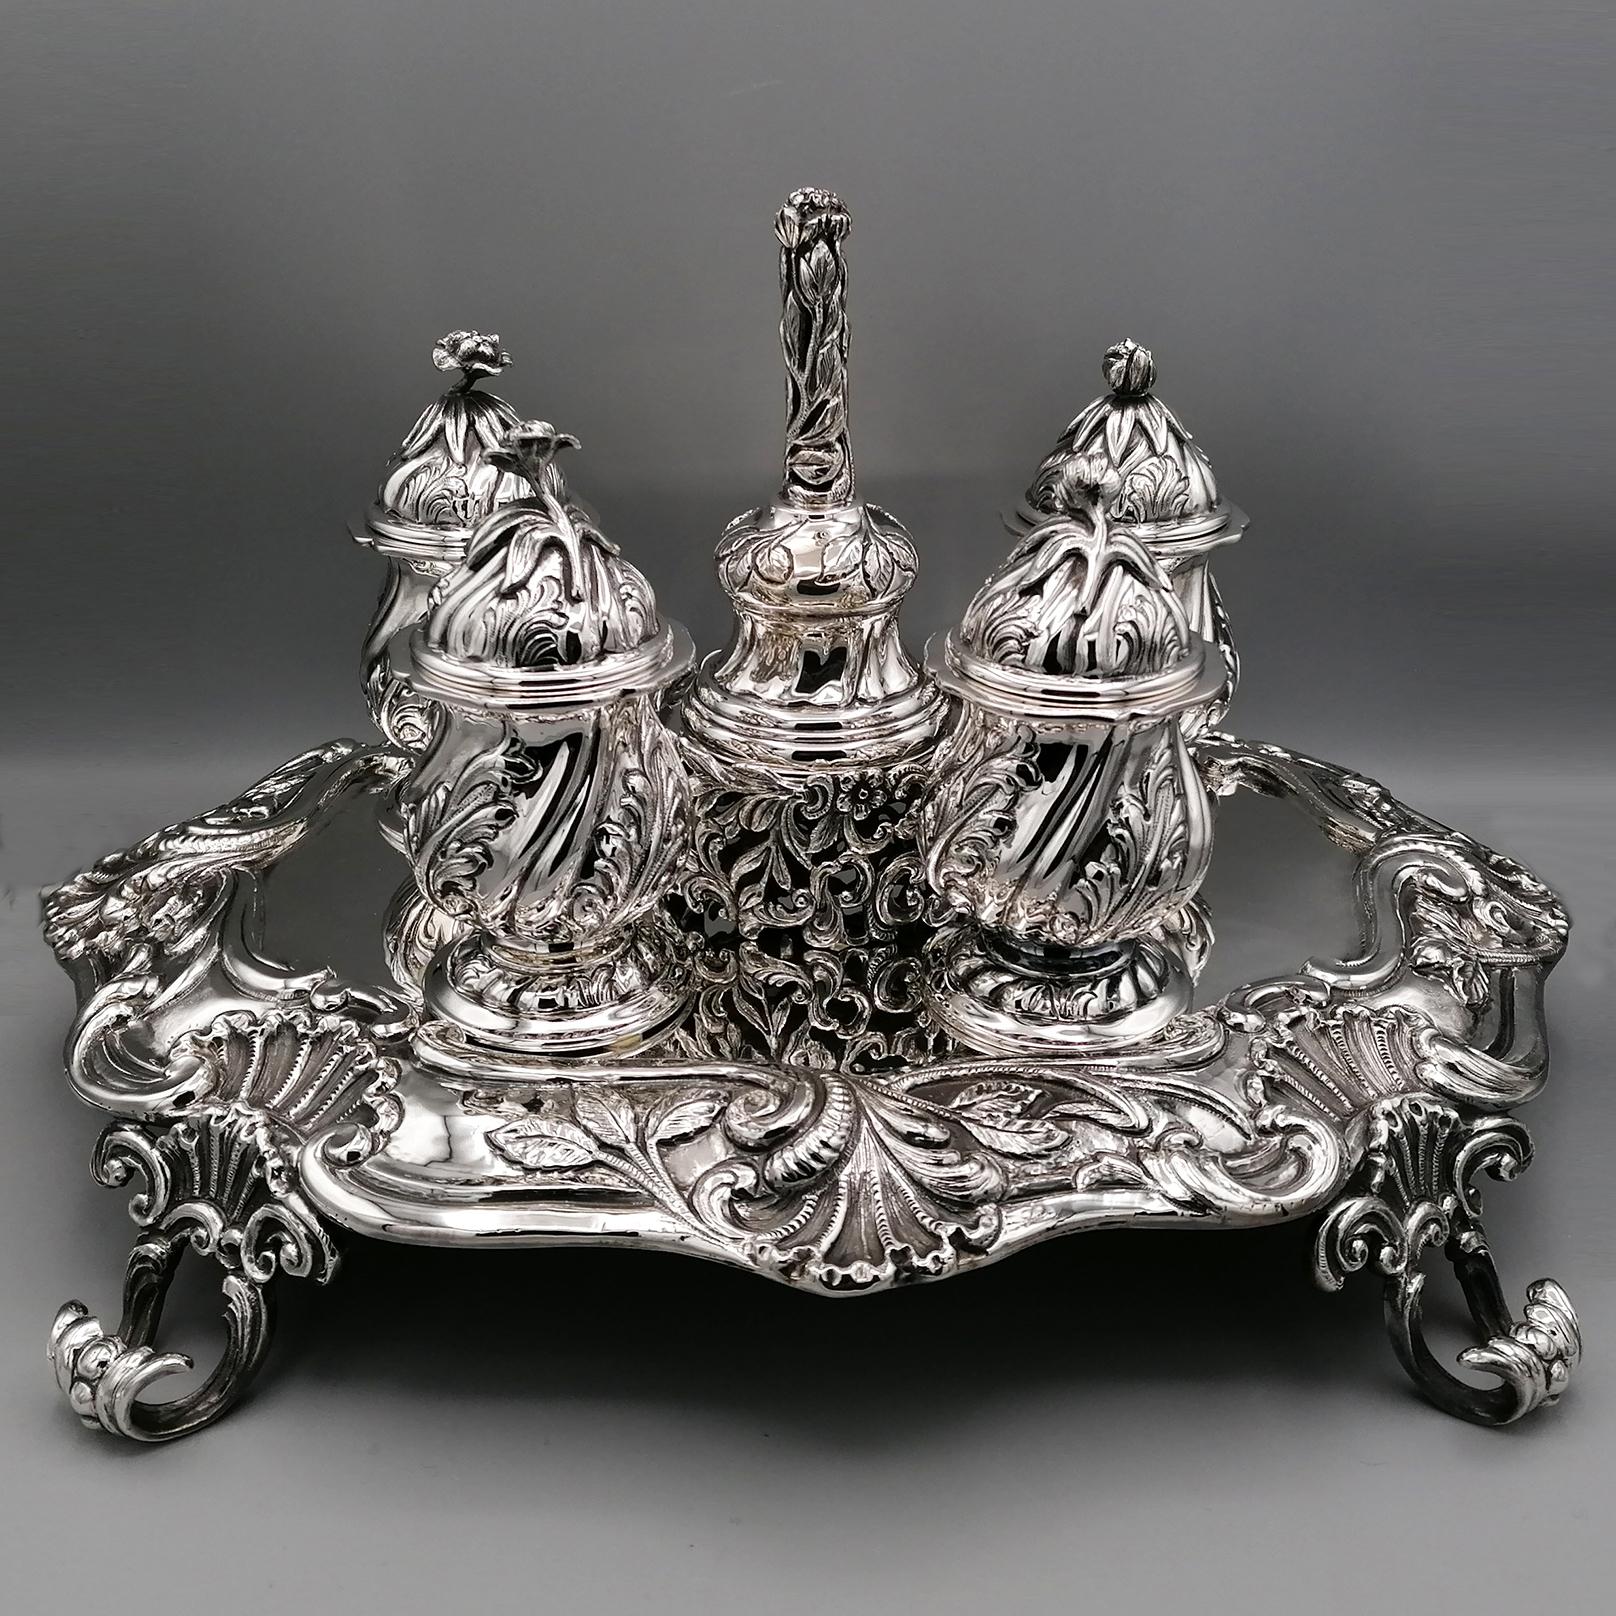 Faithful copy of the writing service by the silversmith Pietro Rubini, Milan c.1775
The inkstand is composed of a shaped tray supported by 4 rocailles feet, modeled along the entire profile by finely embossed and chiselled volutes, leaves and